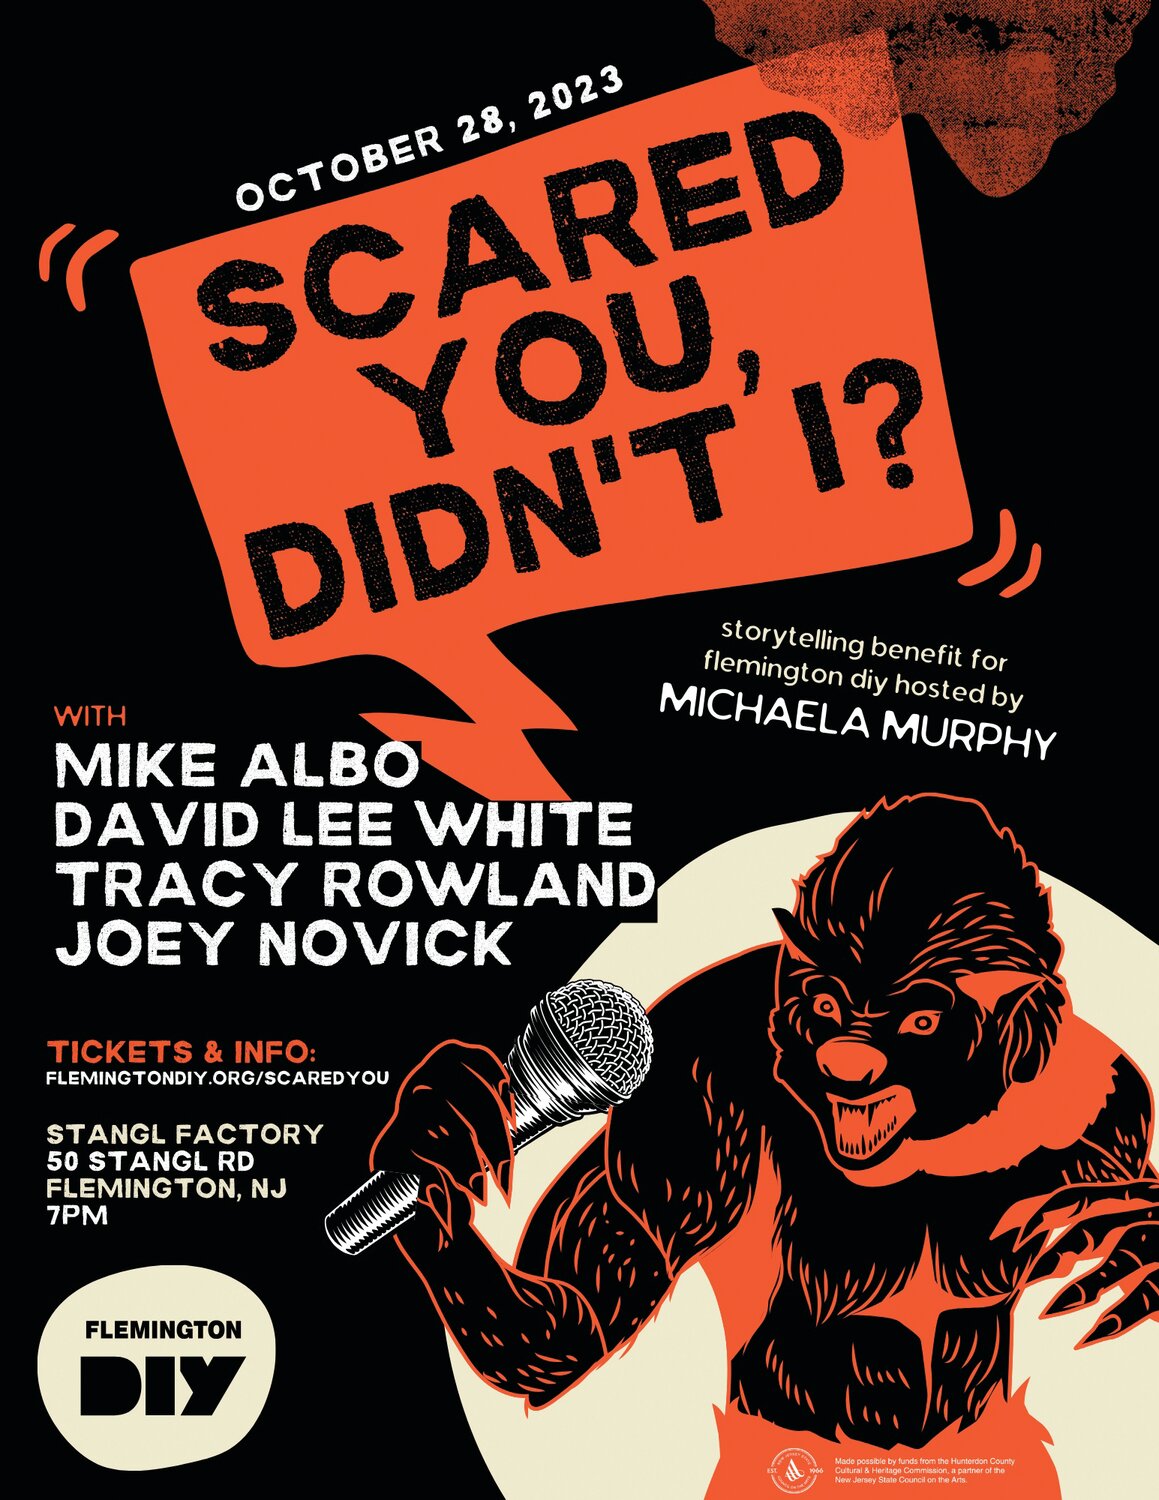 "Scared You, Didn't I?", a Saturday performance by prominent area and national storytellers, will benefit Flemington DIY.